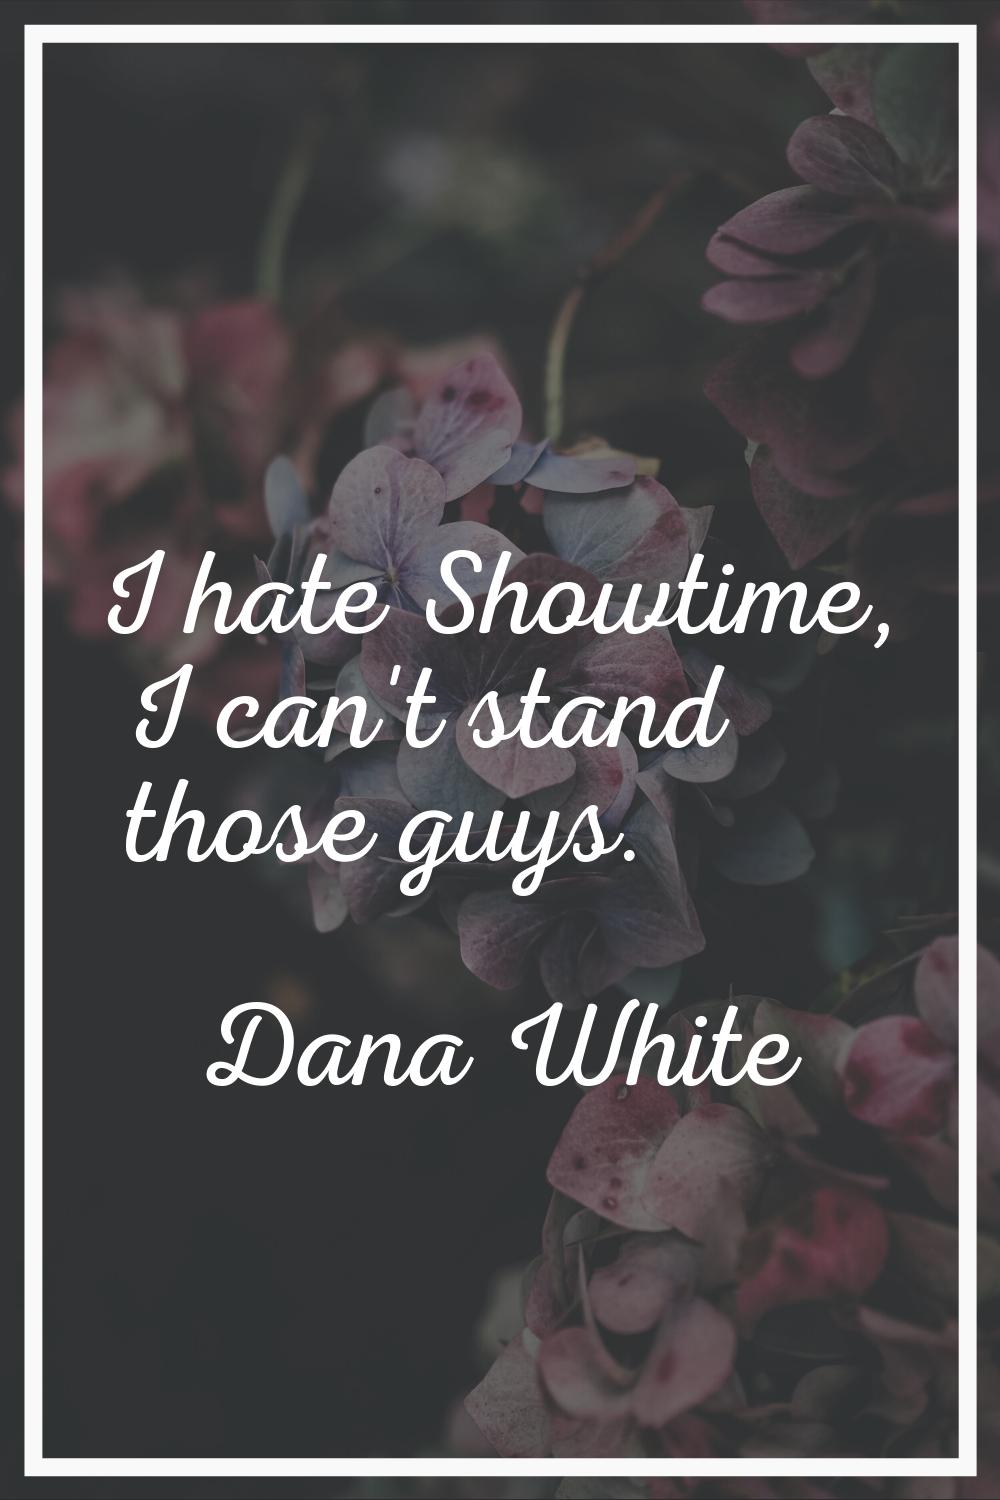 I hate Showtime, I can't stand those guys.